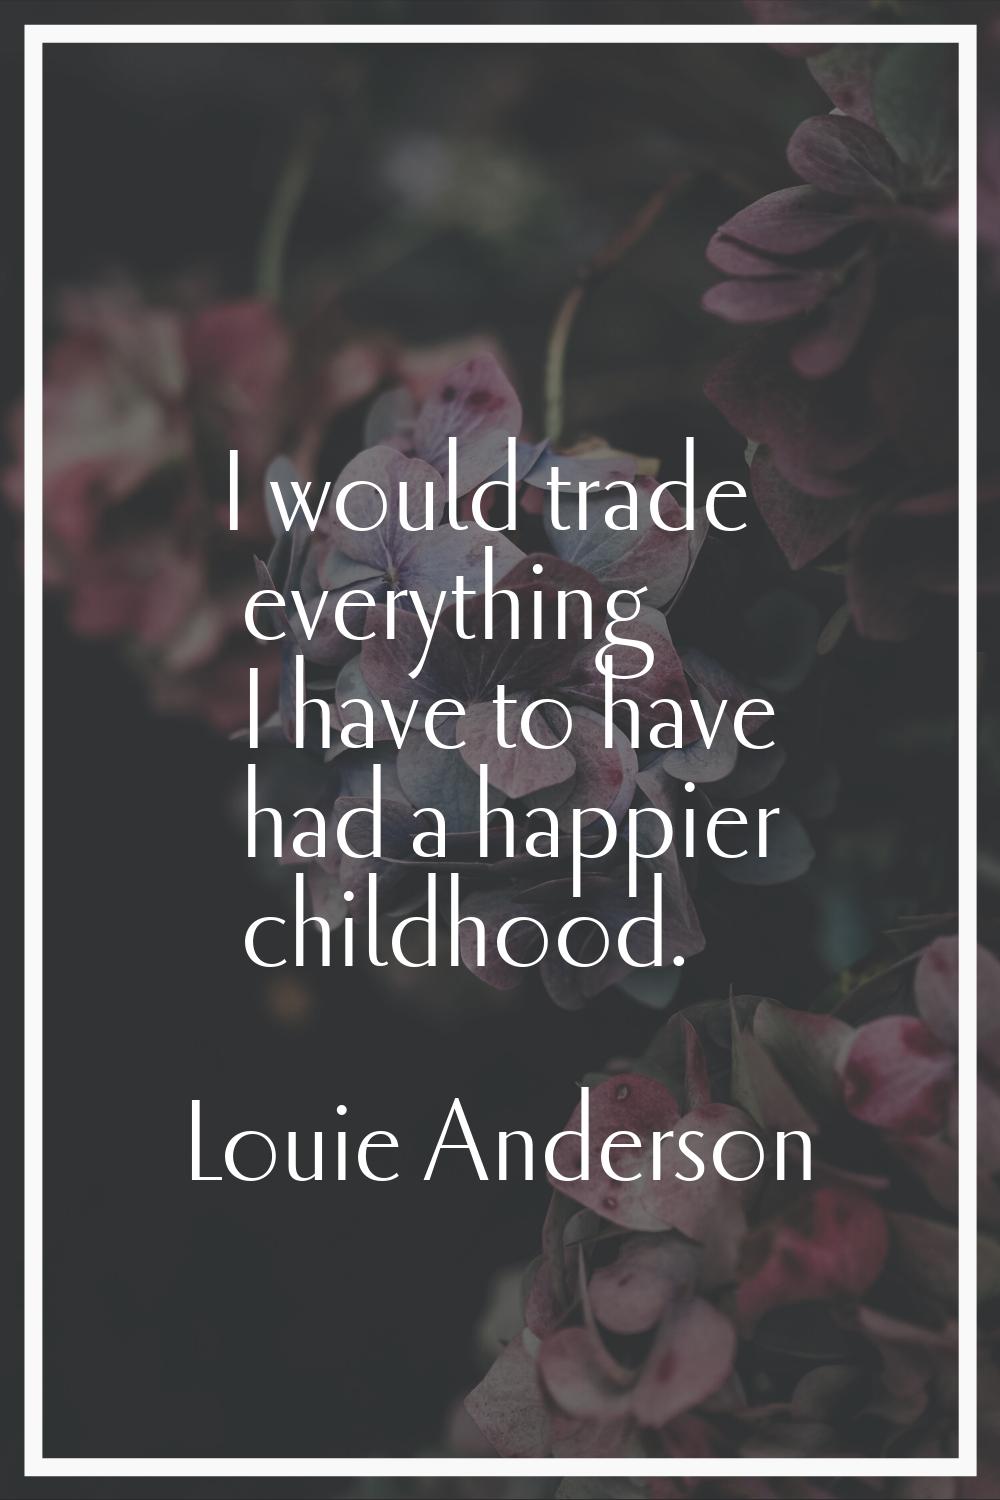 I would trade everything I have to have had a happier childhood.